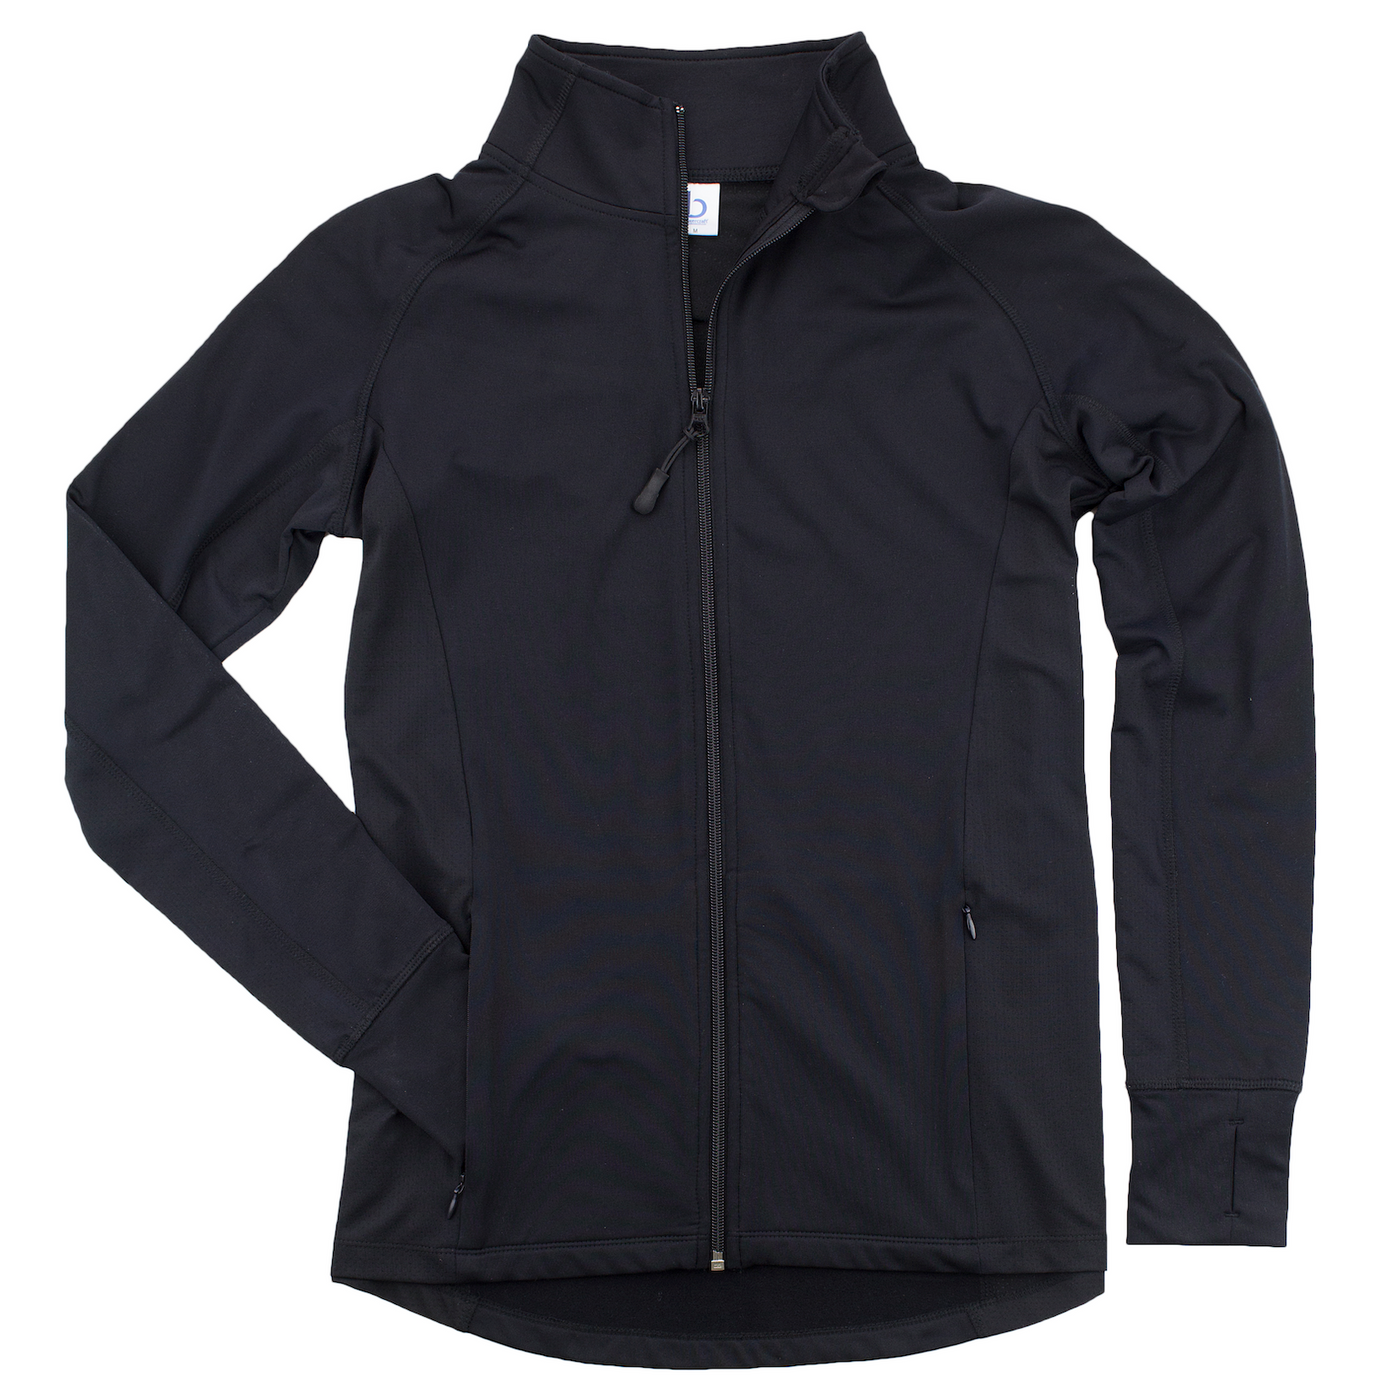 Girls Youth Mesh Insert Competition Jacket | Dance